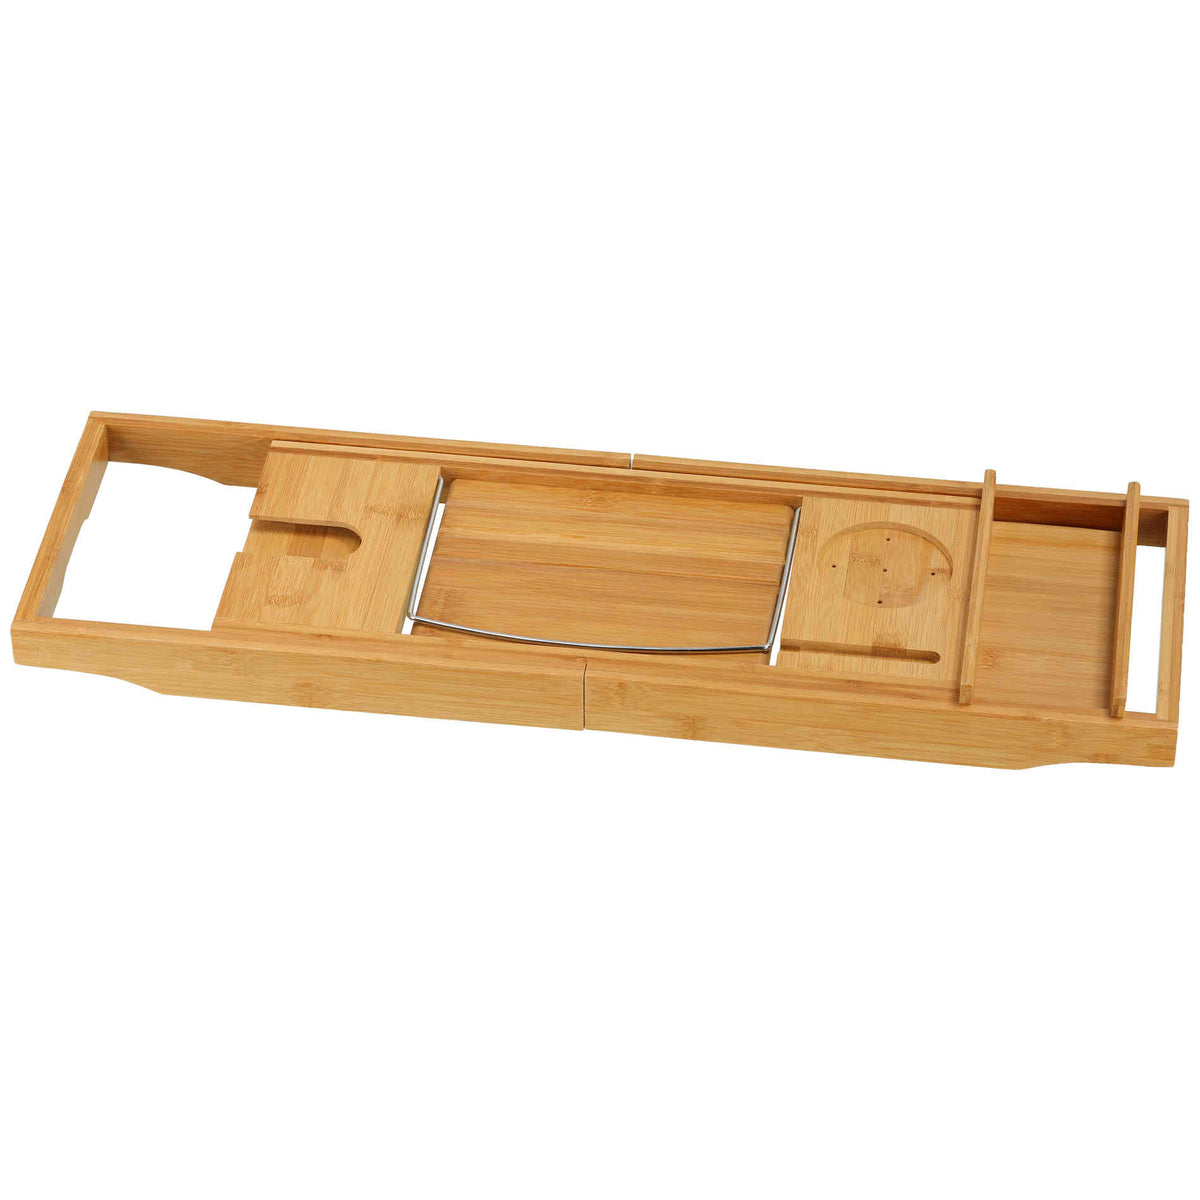 Cortesi Home  Vanessa Bamboo Bathtub Caddy with Extending Sides